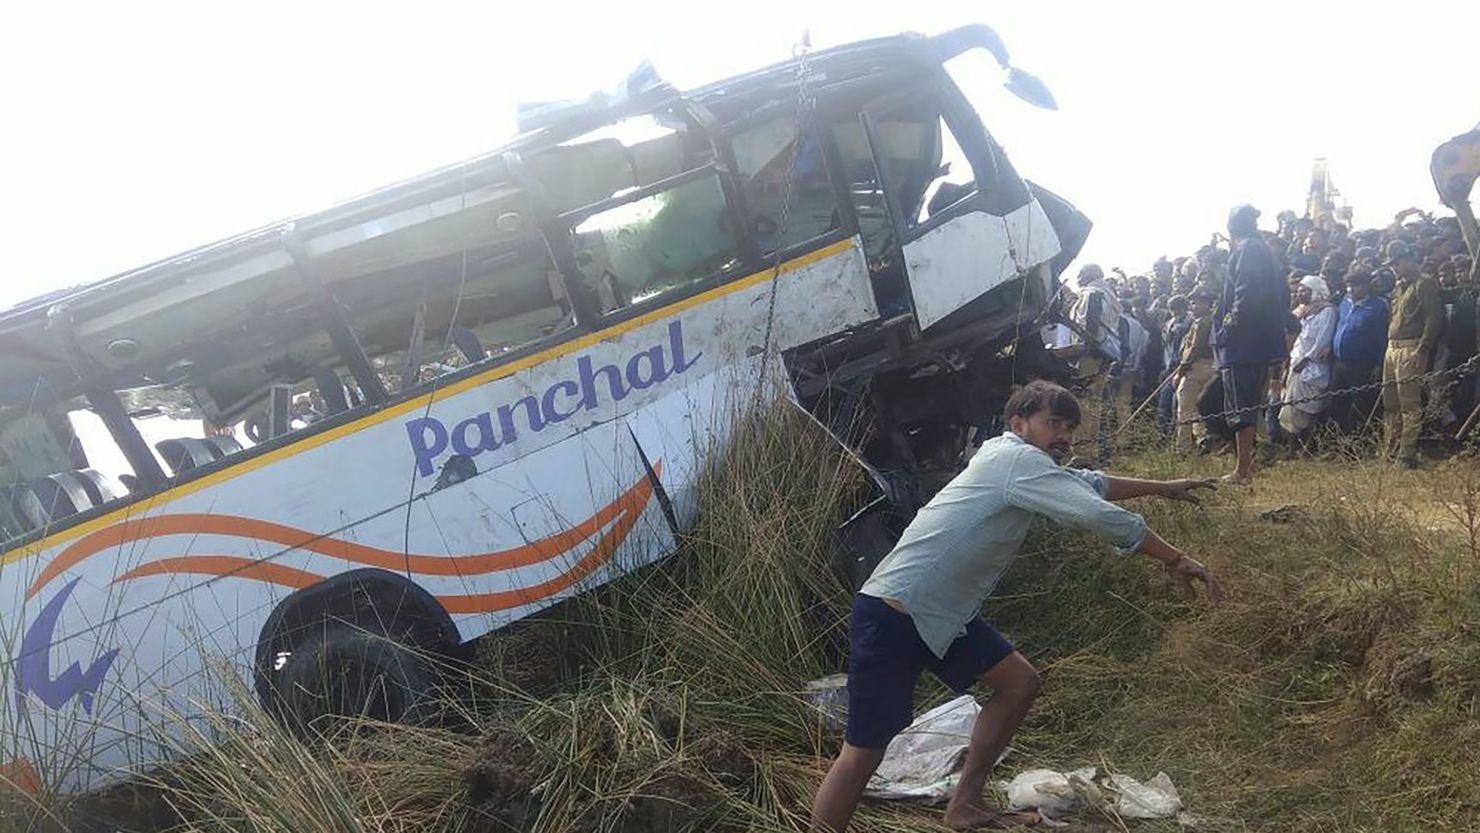 The pilgrims' bus is pulled from the Banas River after the fatal accident in Sawai Madhopur, India, on Saturday.